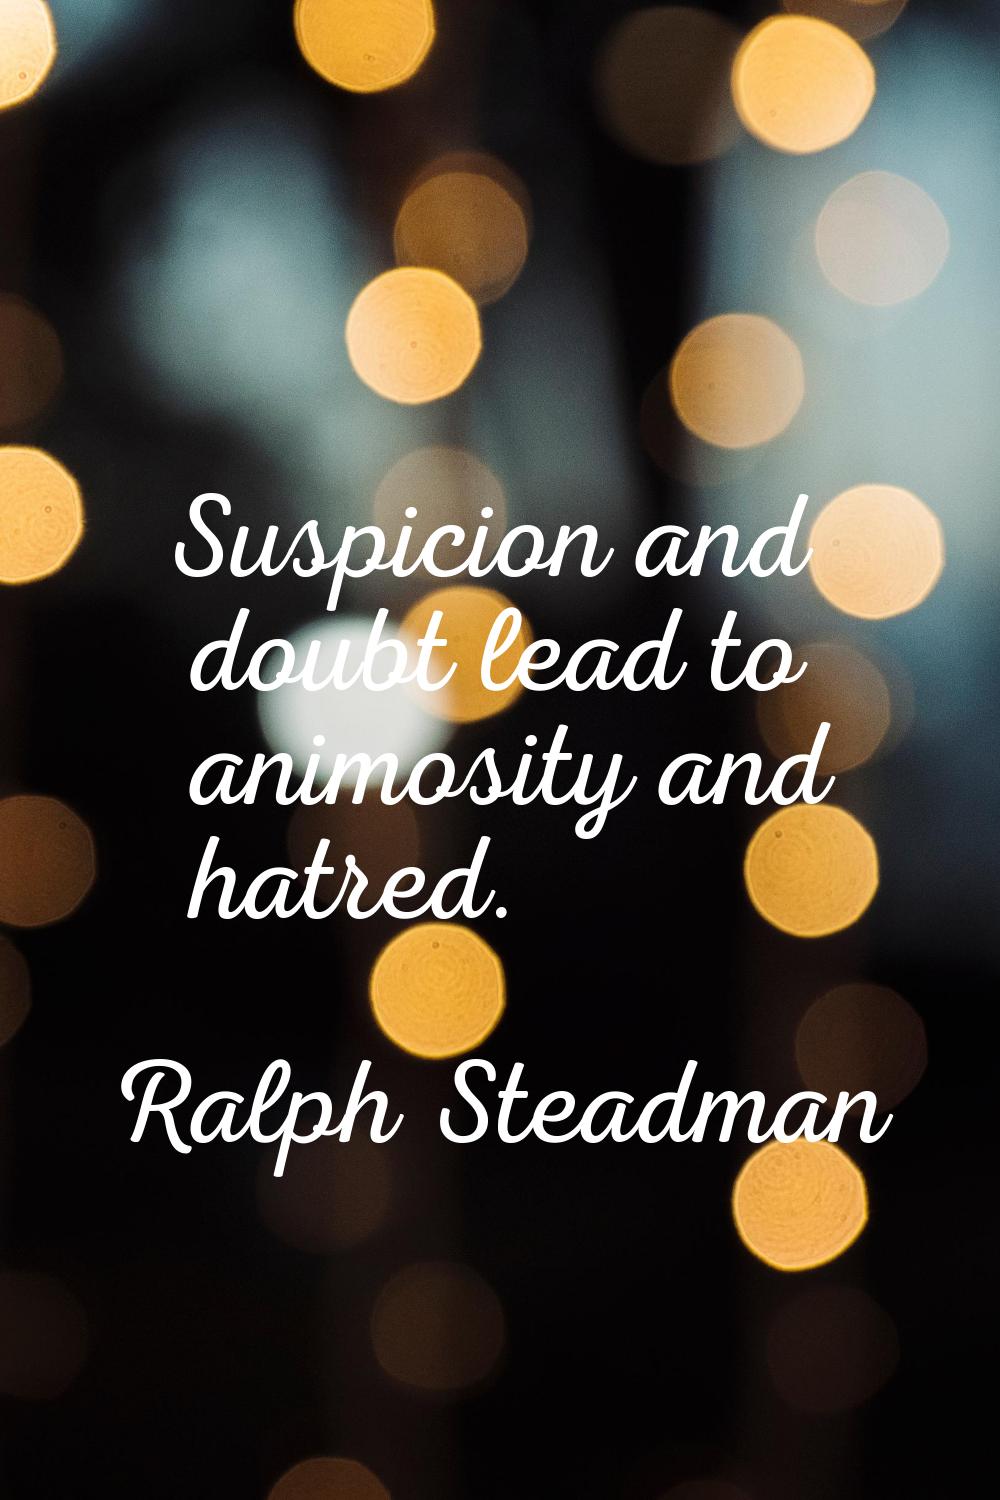 Suspicion and doubt lead to animosity and hatred.